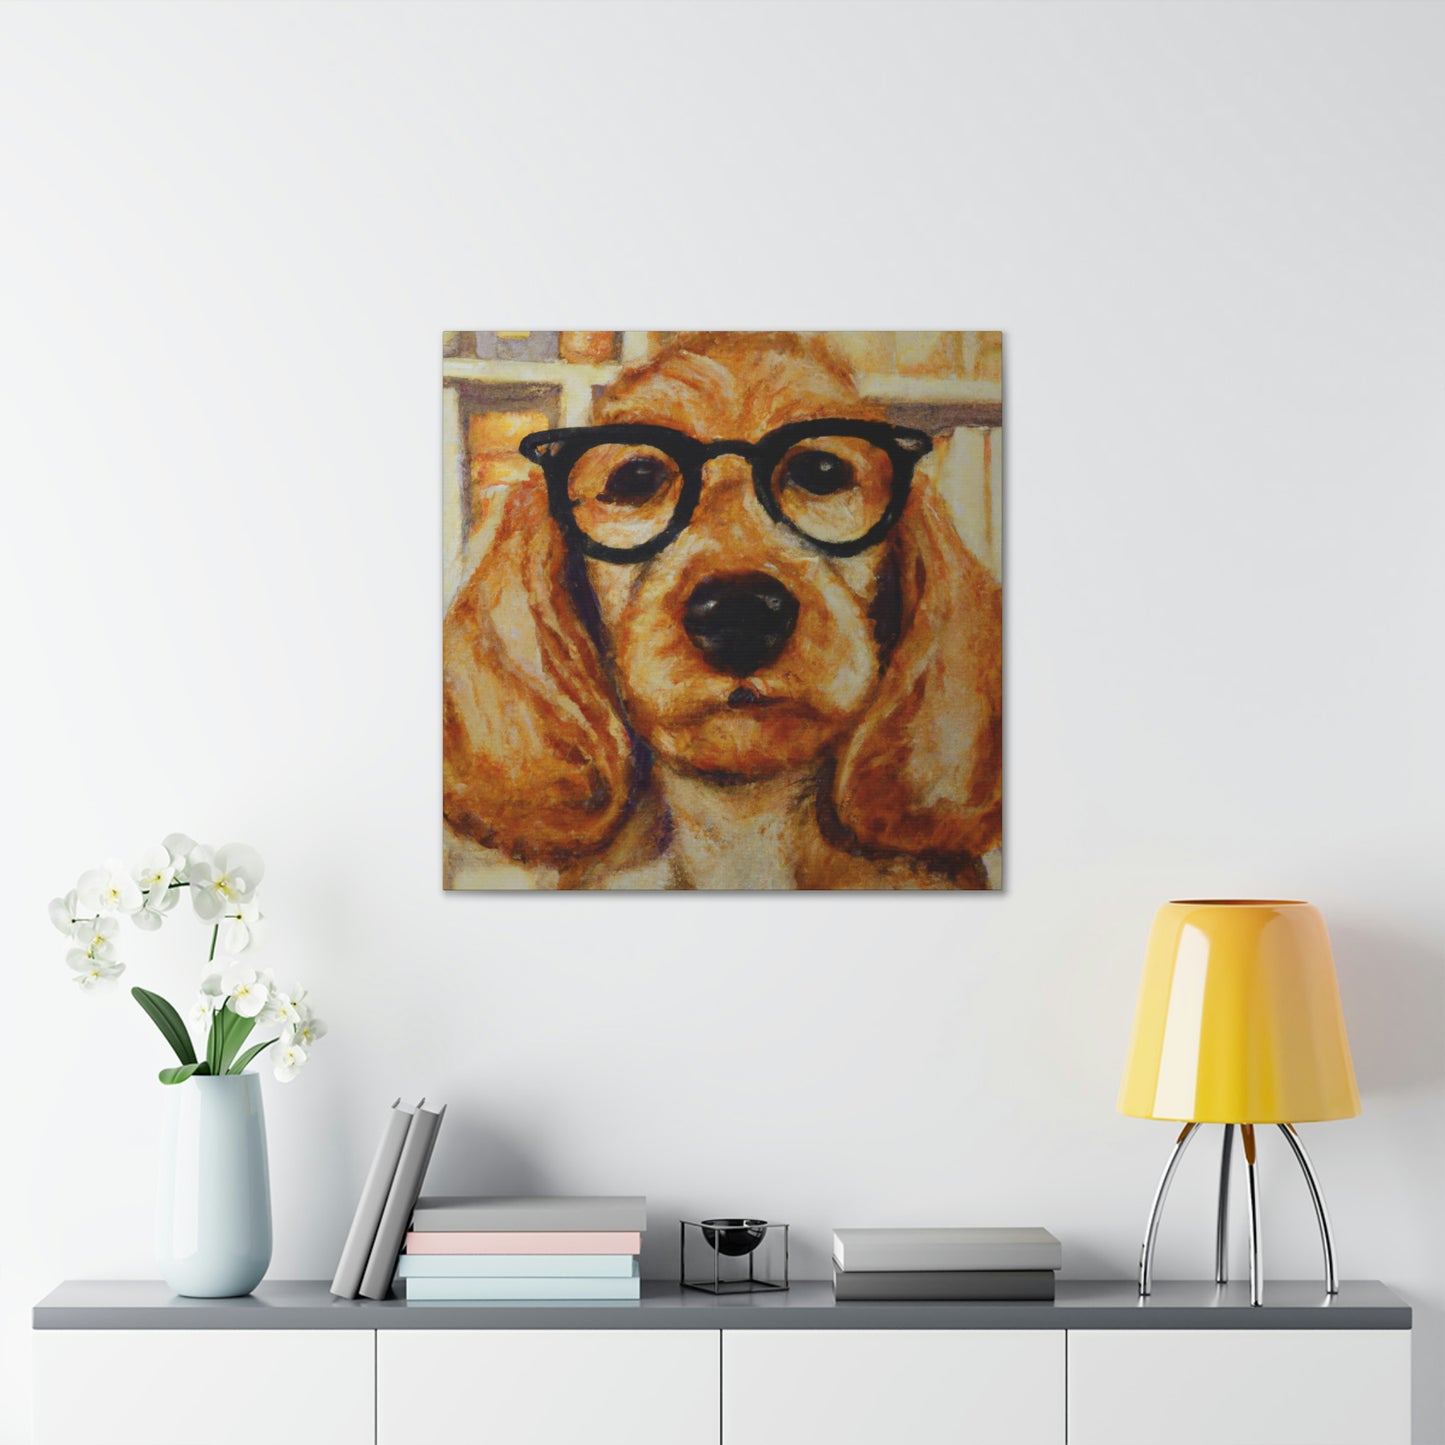 Snoopy Snooperson - Dog Lovers Canvas Wall Art